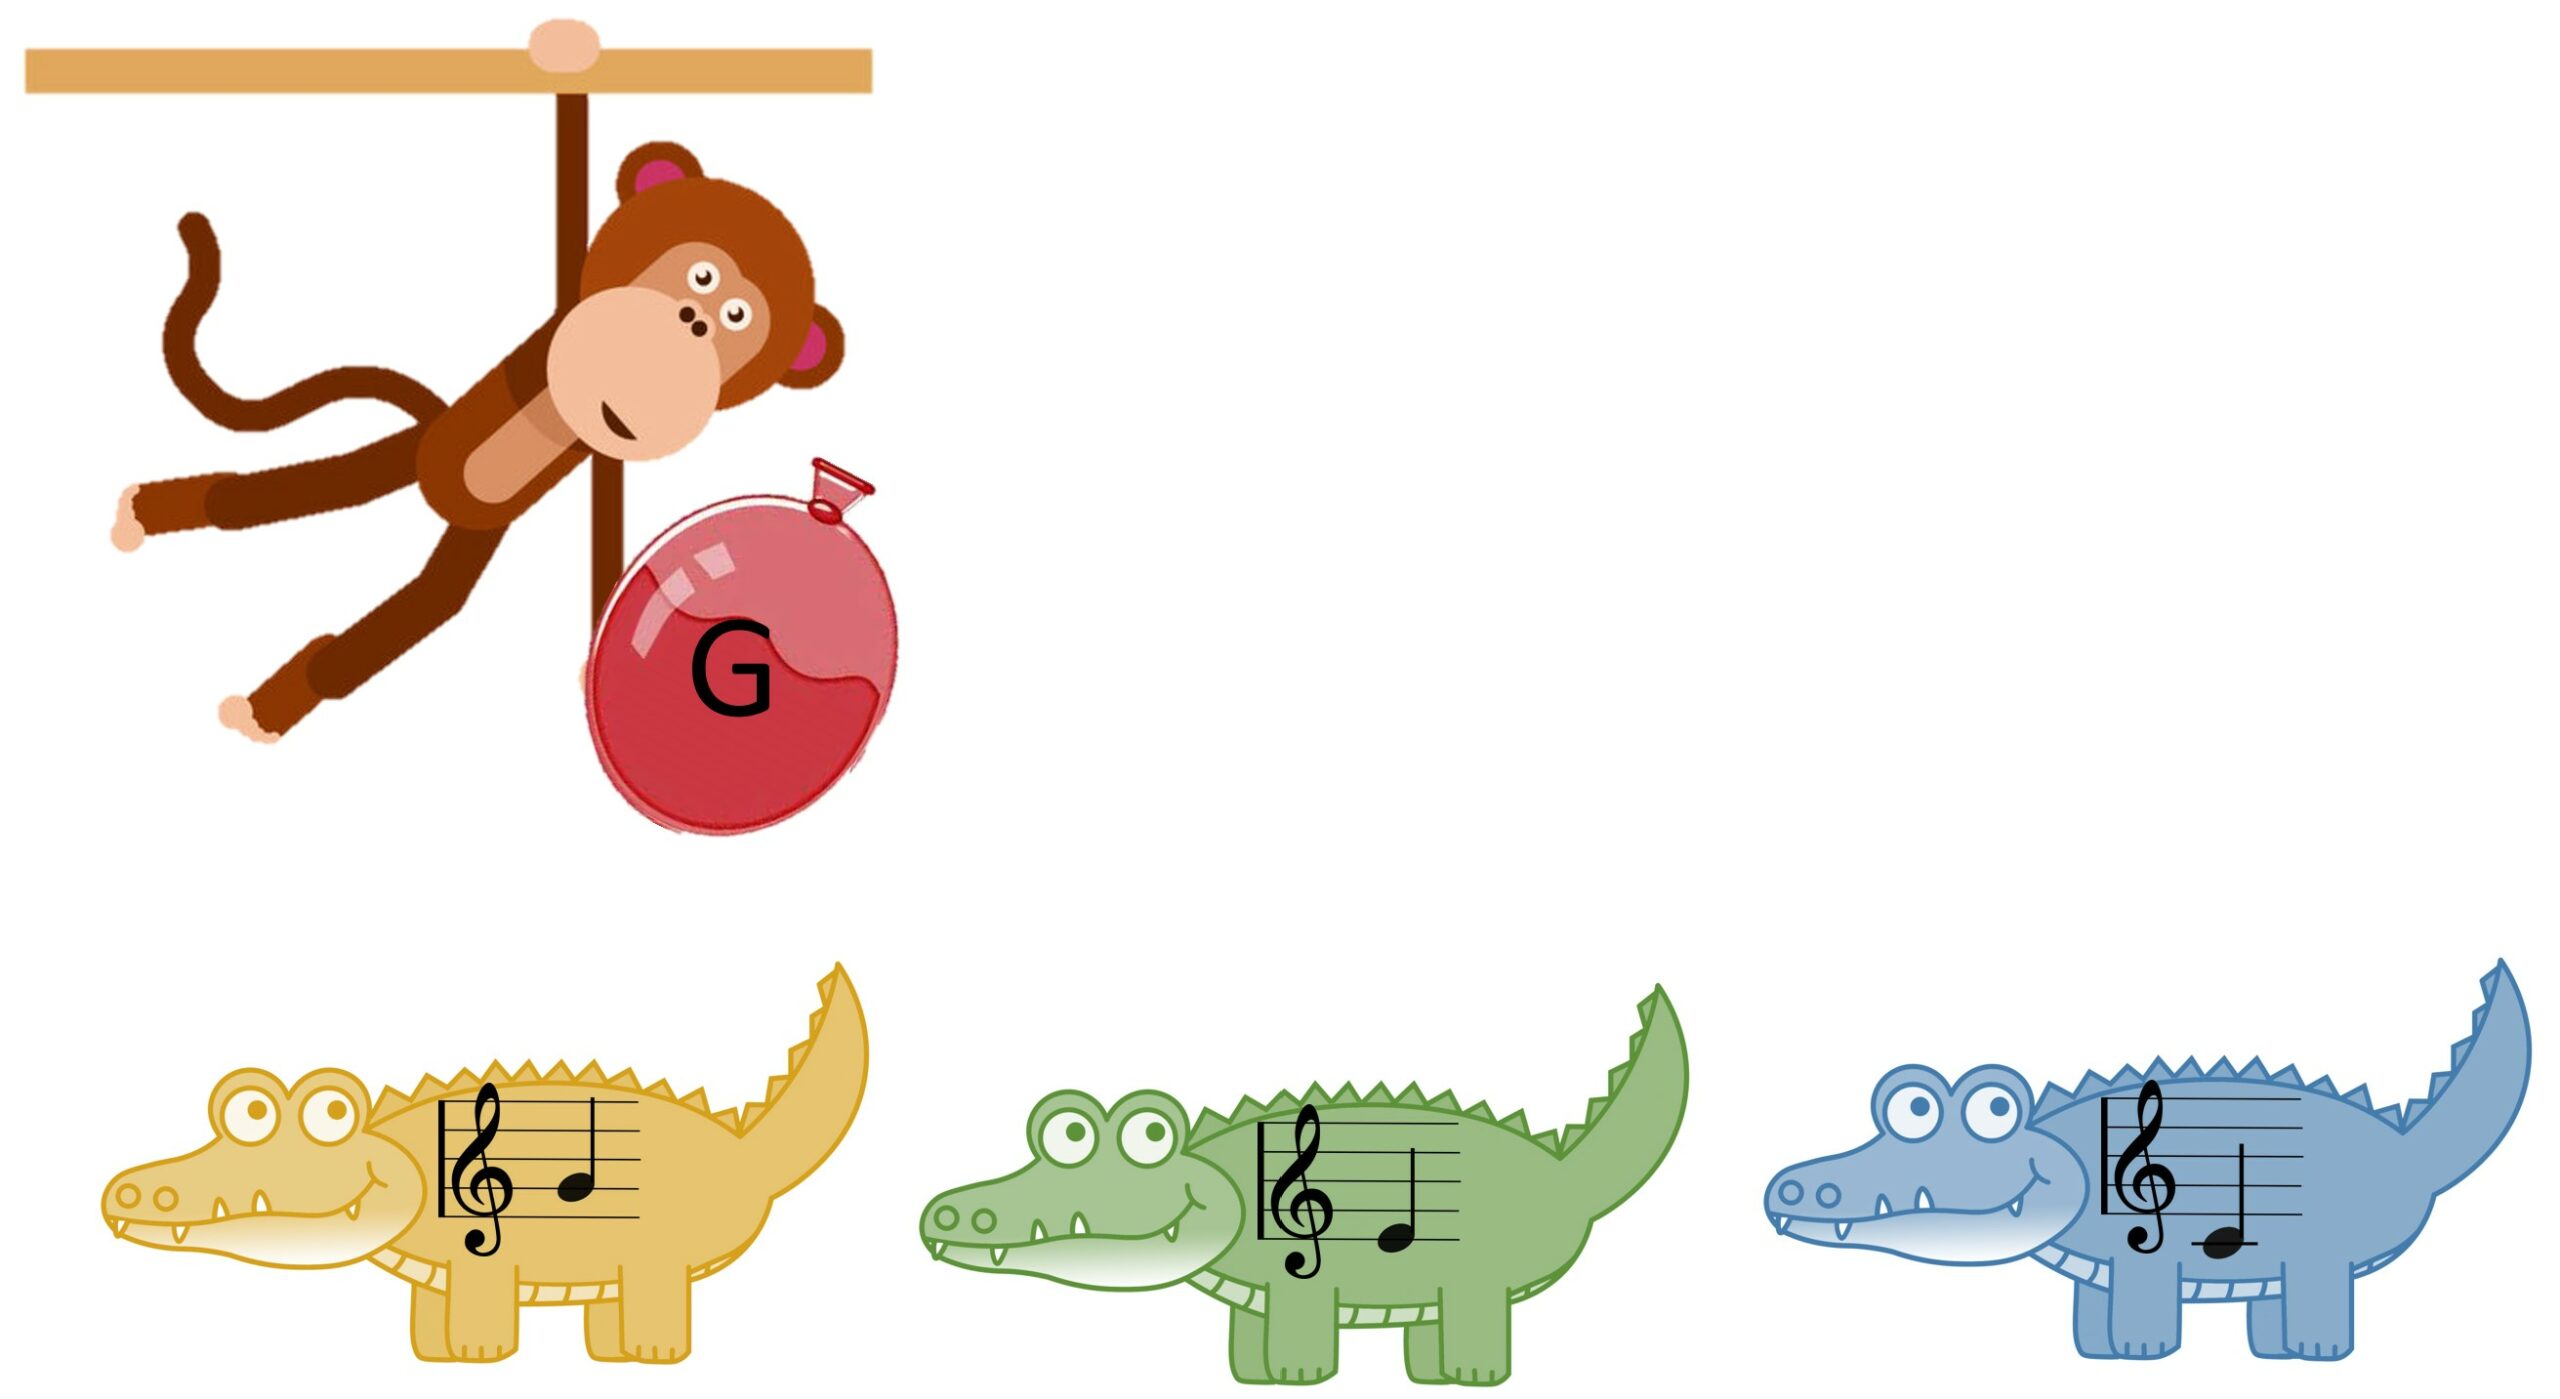 Monkey Teasing Crocodile- Interactive Music Theory Digital Game's featured image